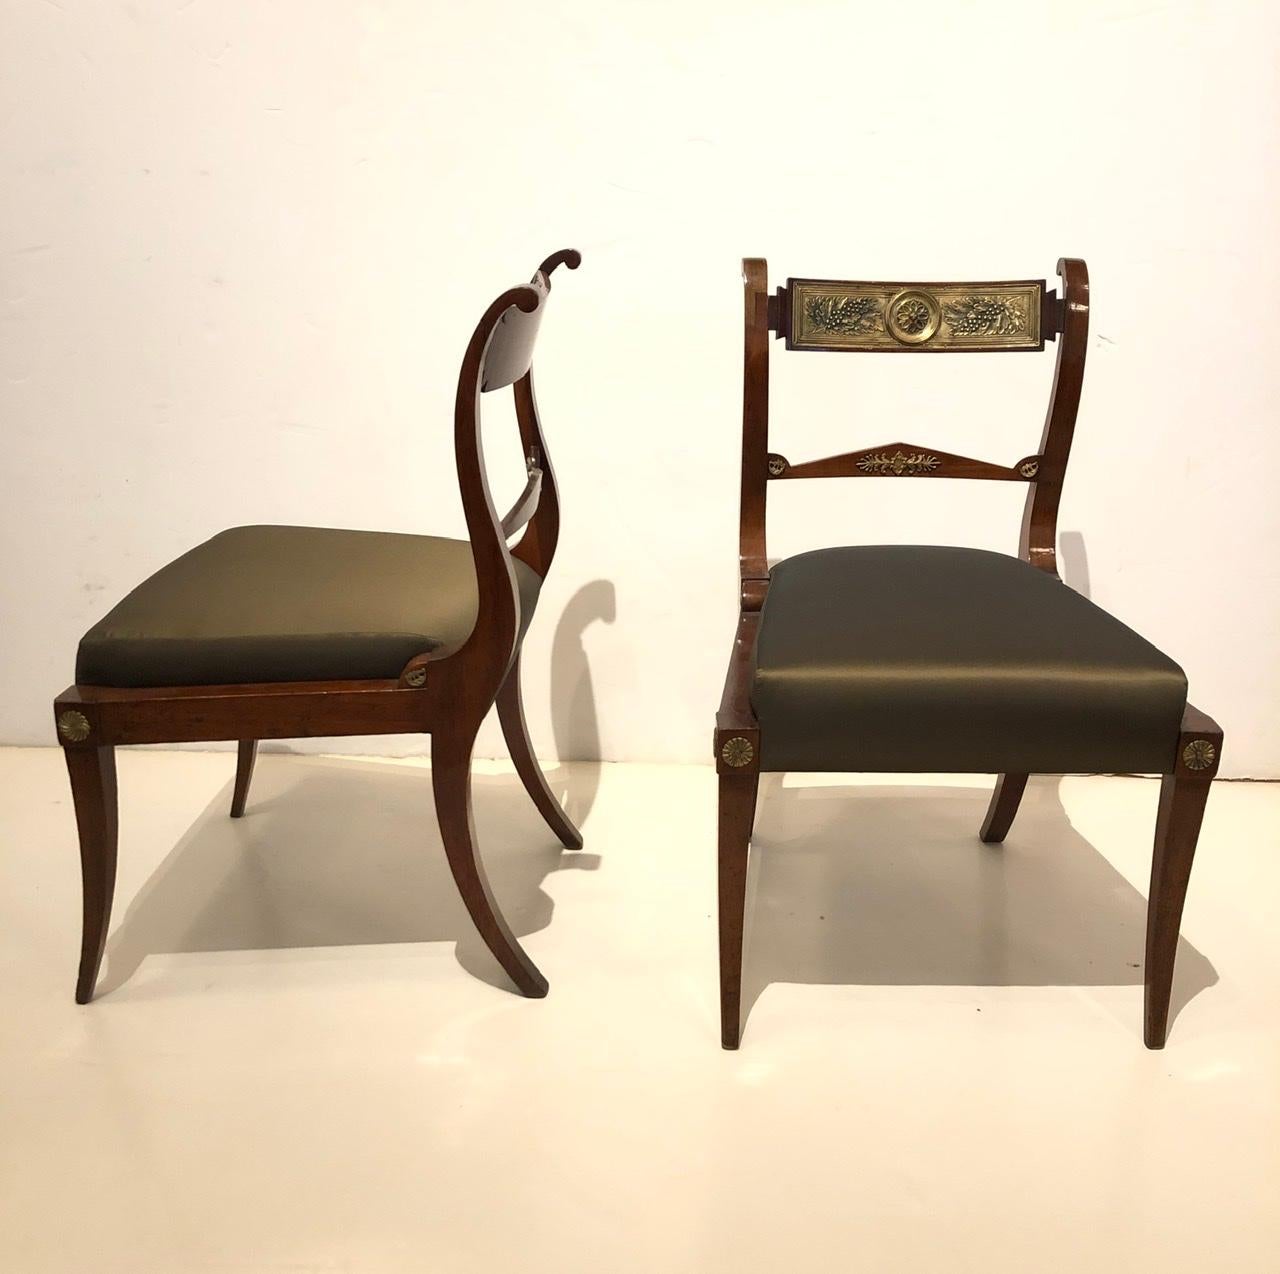 An elegant pair of Italian Neoclassical mahogany chairs adorned with patinated brass mounts from Italy. These chairs feature bold saber shaped legs and vertical lyre shaped back supports framing the unusual horizontal cross sections. Each chair back